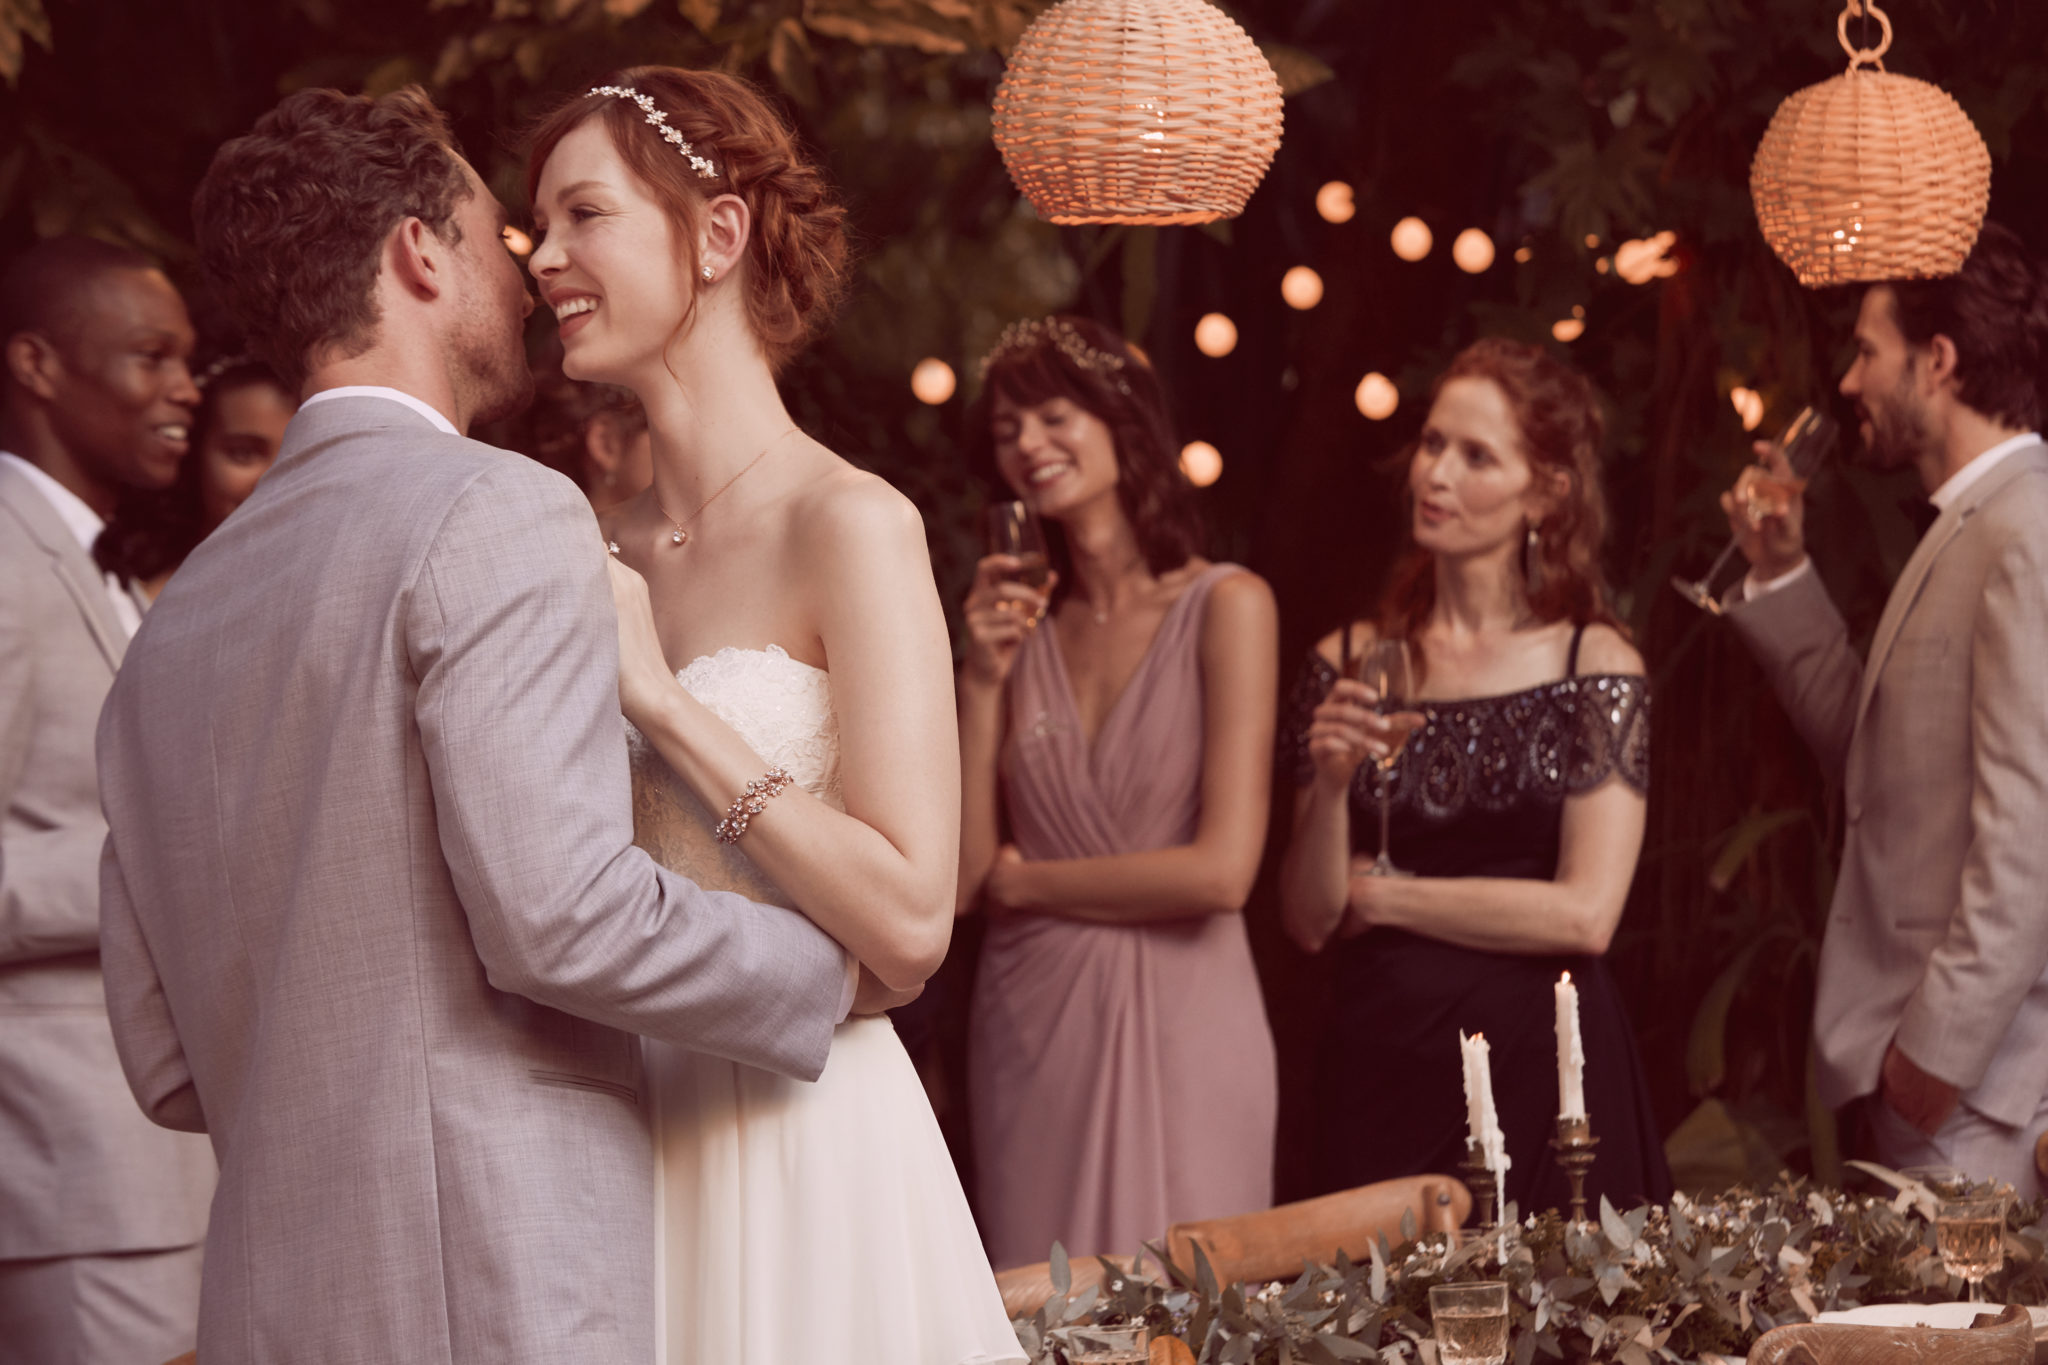 5 Moments You’ll Definitely Want Captured In Your Wedding Video